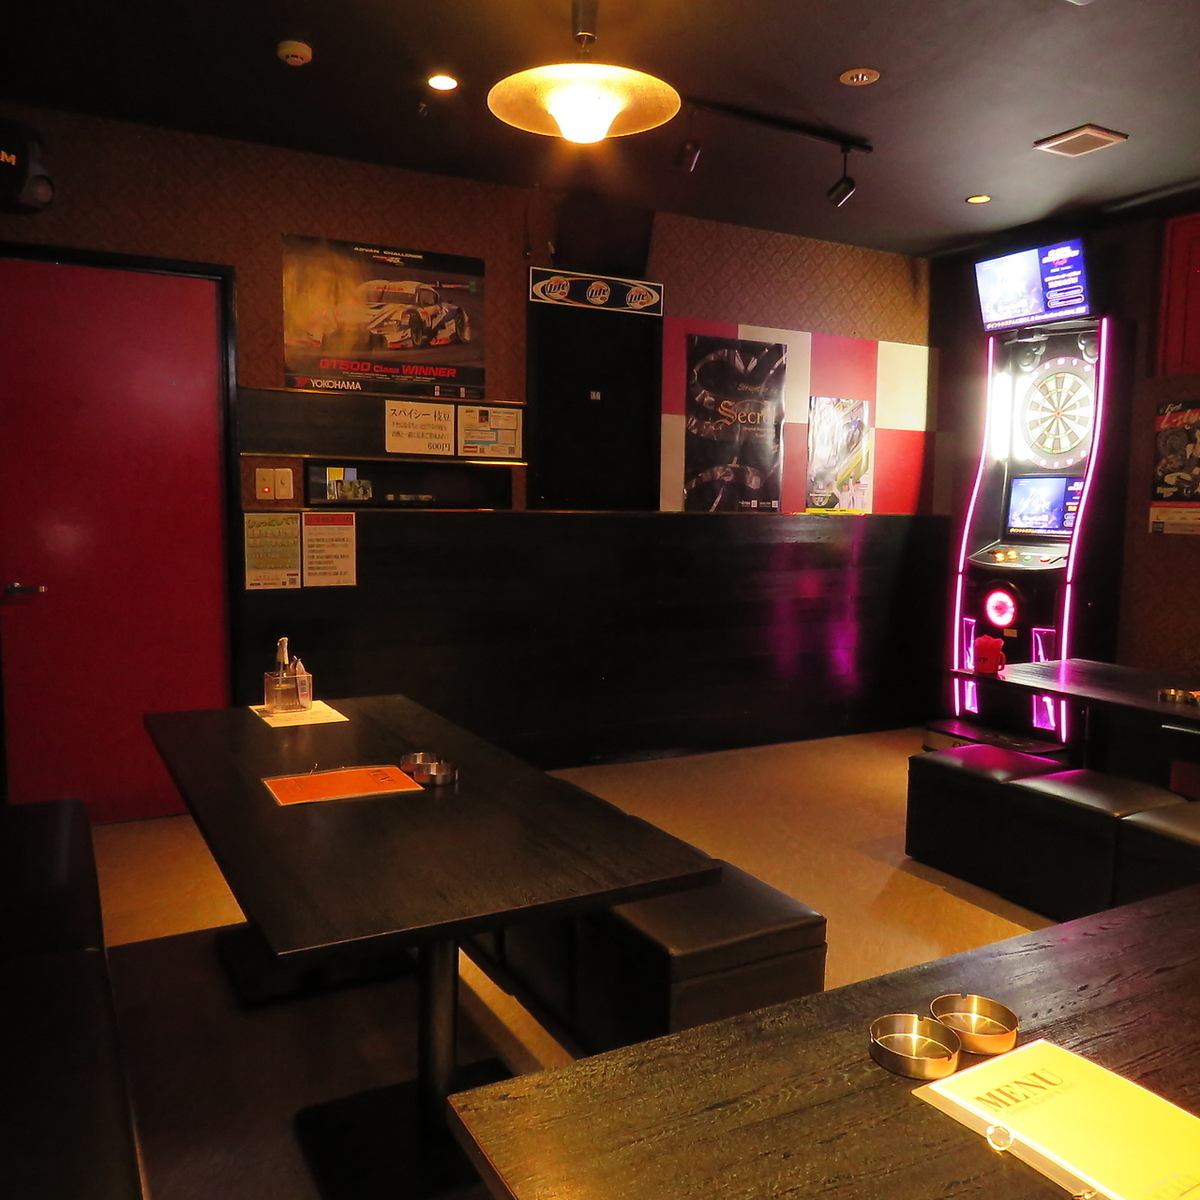 Open until 4am the next morning! Private rooms with darts and karaoke are very popular!